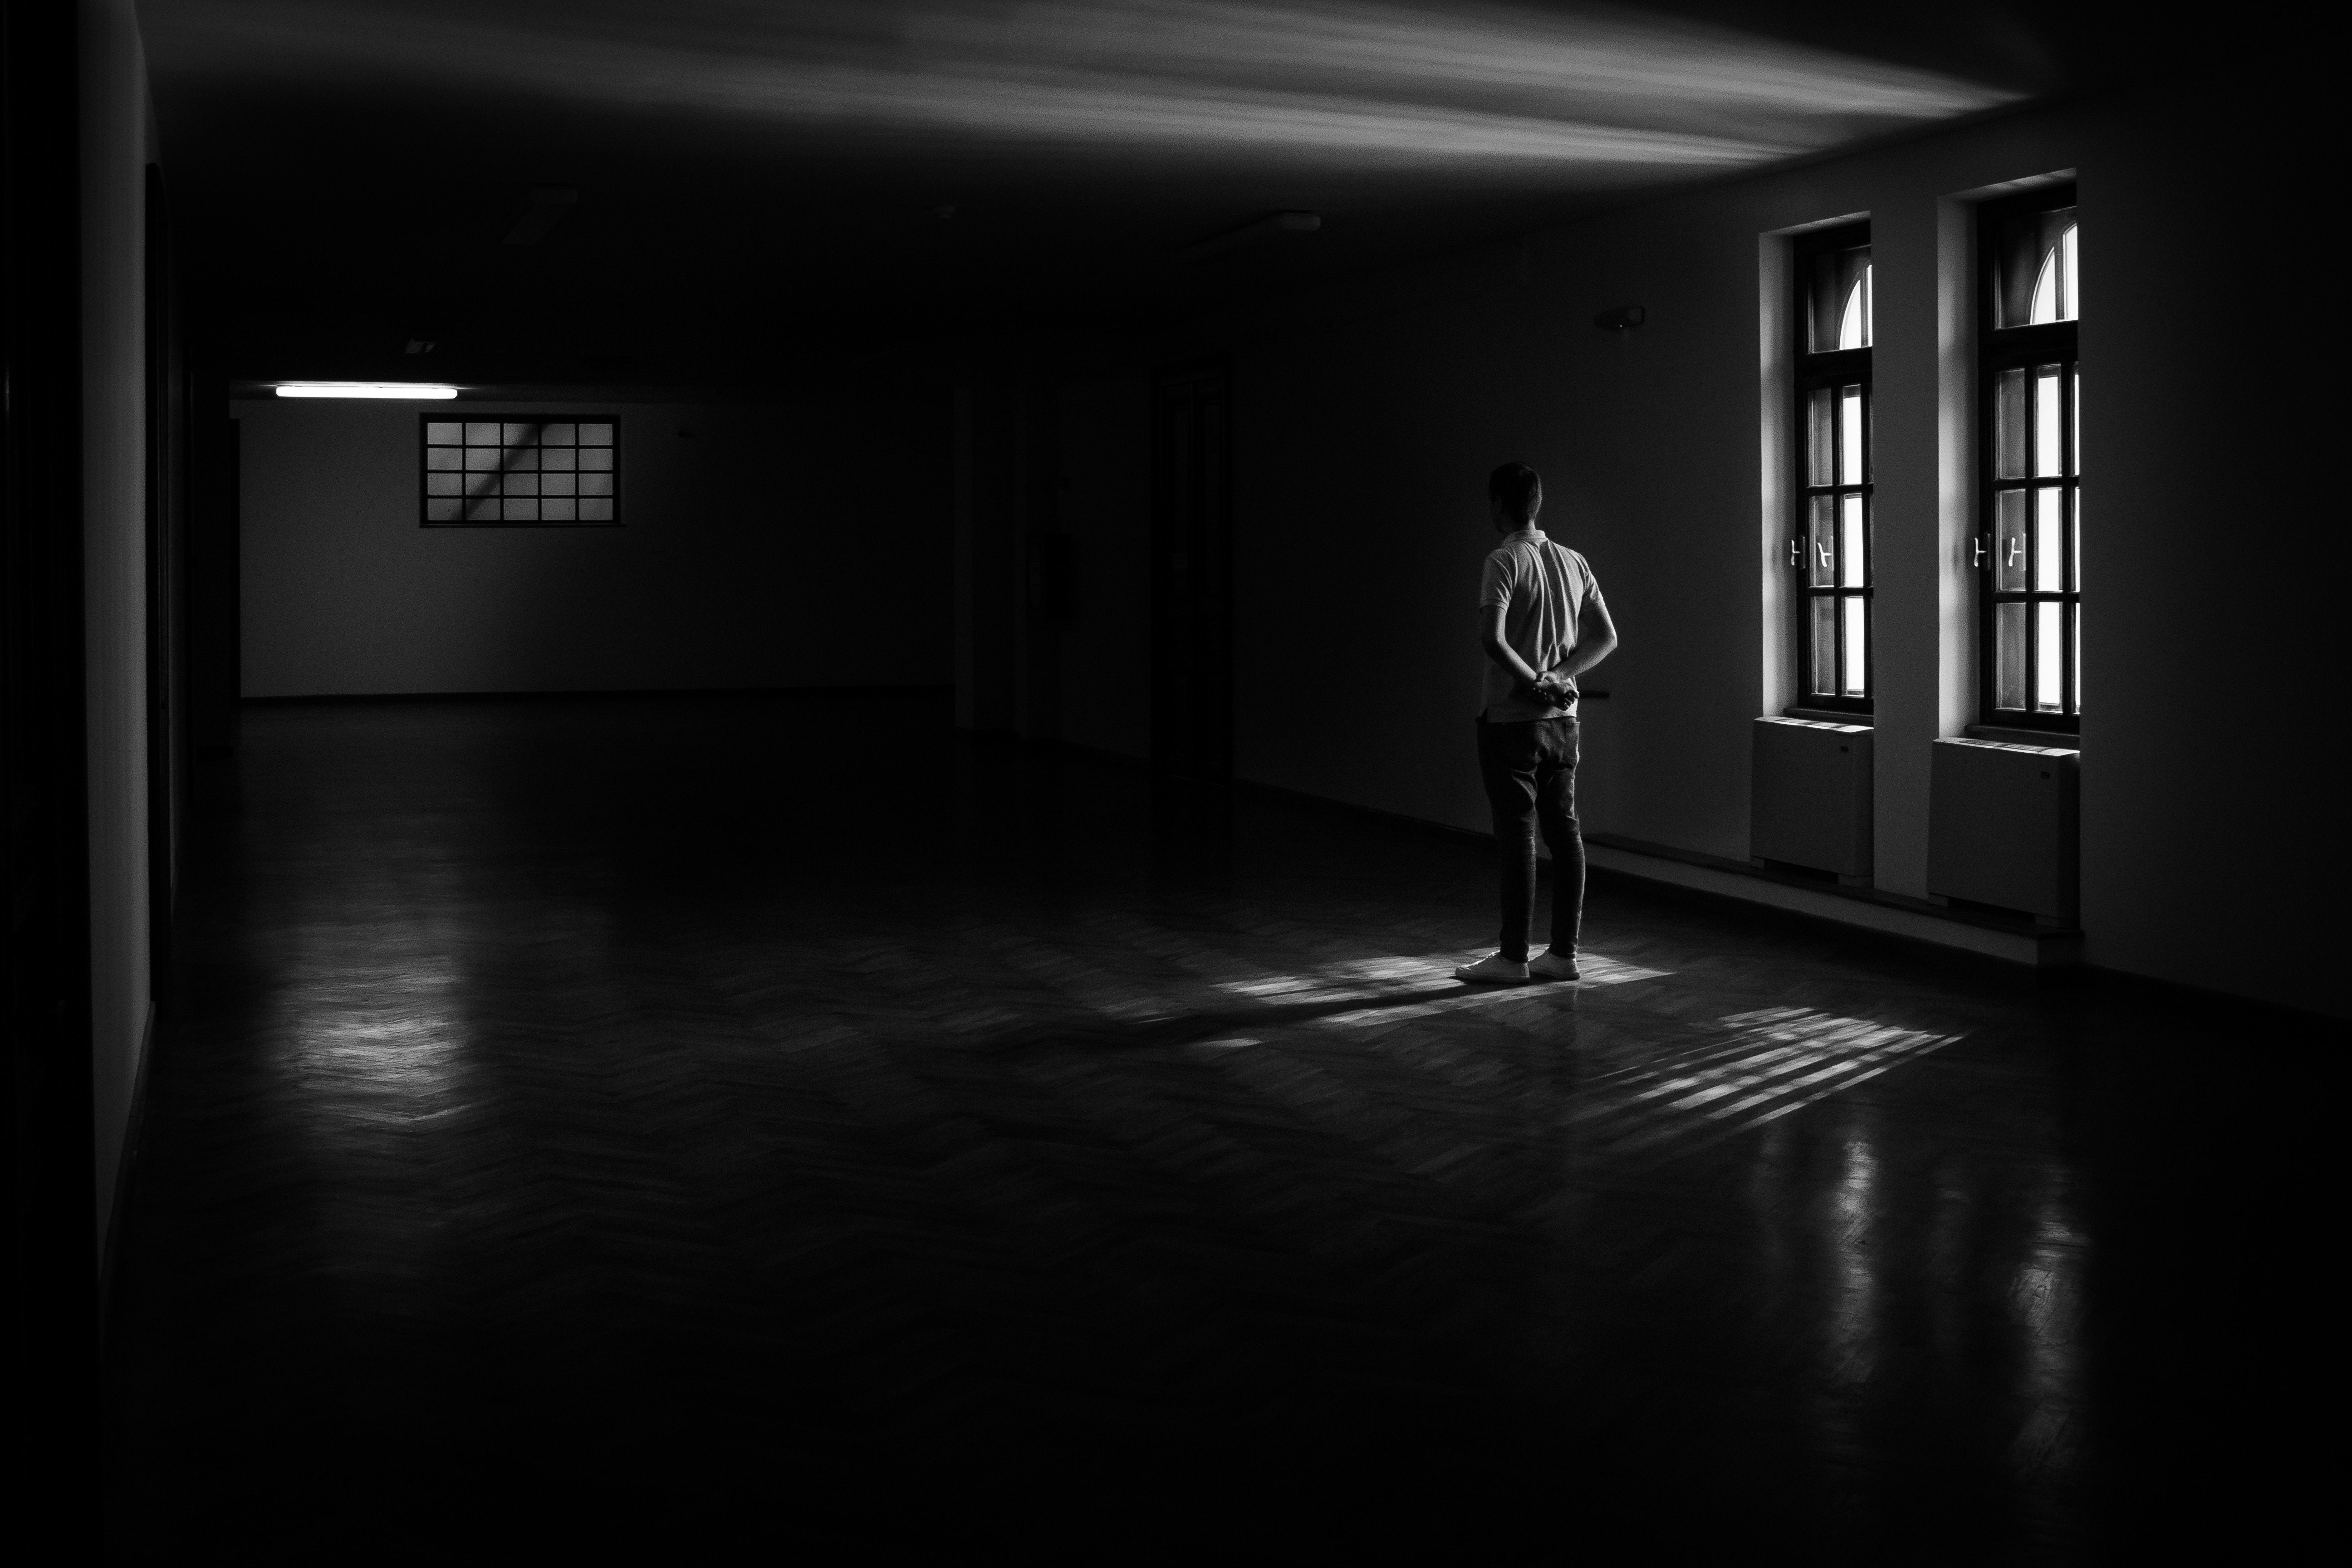 5184x3456 #black and white, #person, #busted, #dark